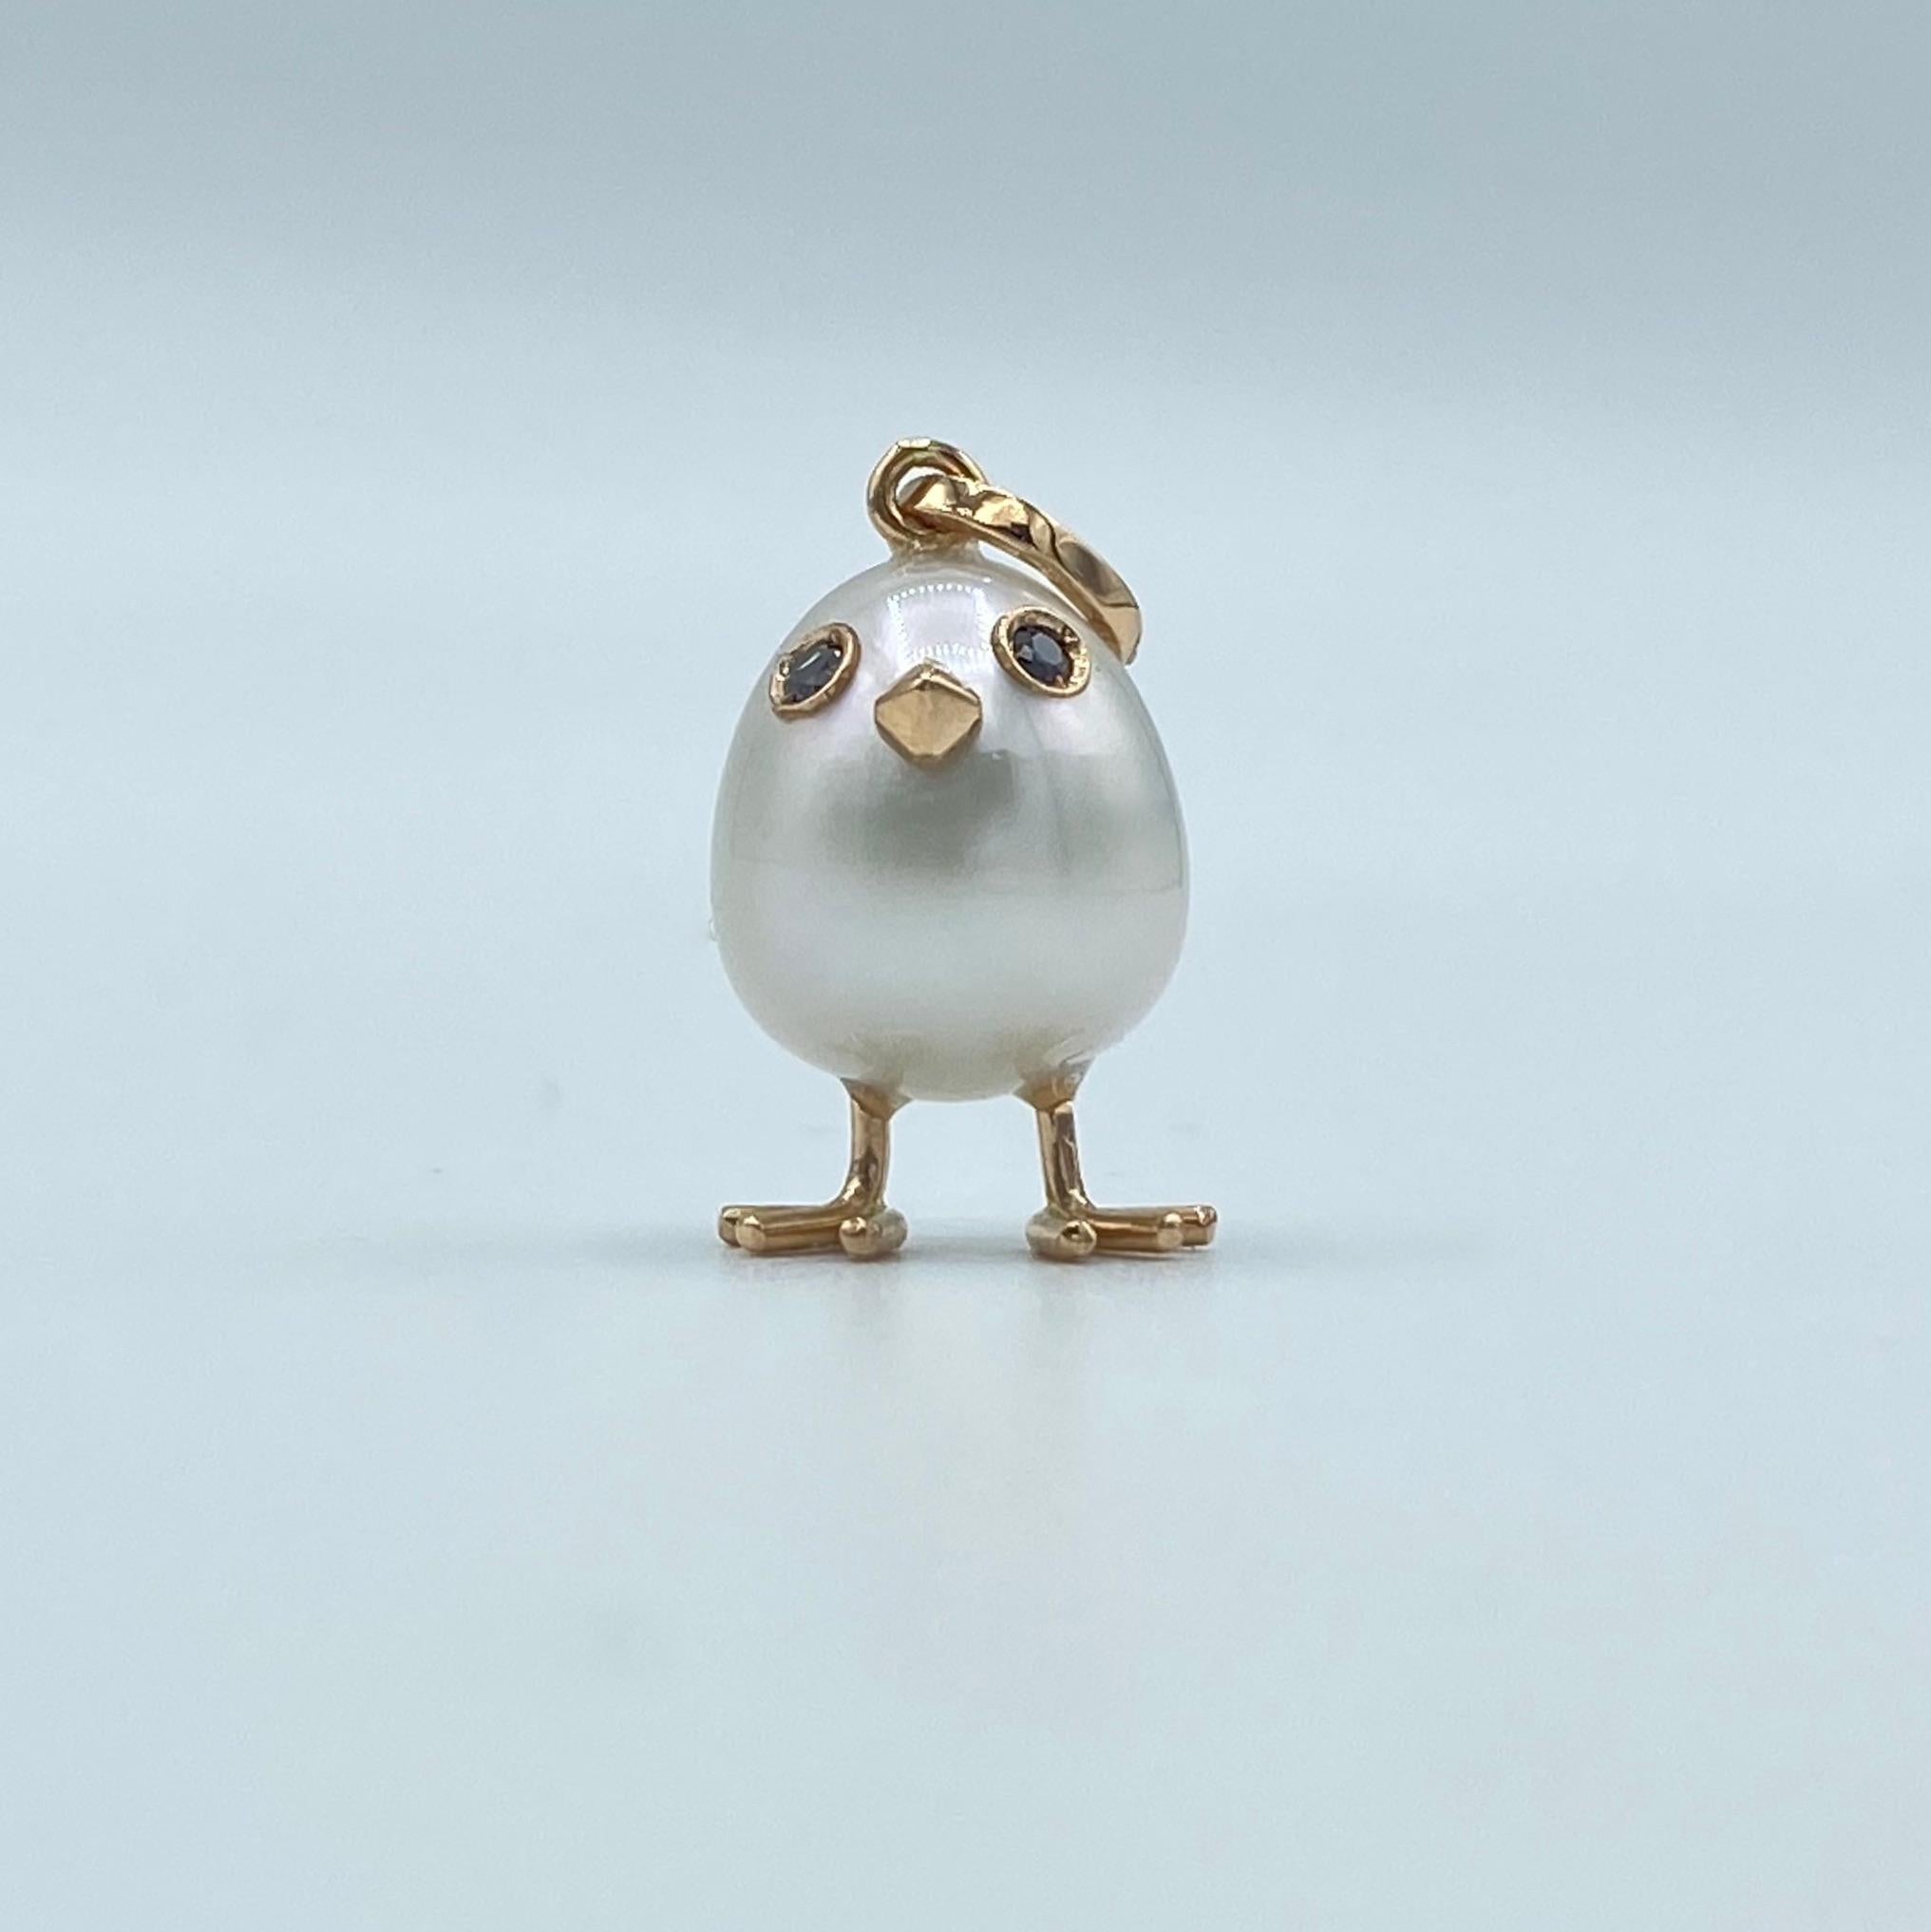 Chick Australian Pearl Diamond Yellow Red white 18 Kt Gold Pendant  Necklace
A oval shape Australian pearl has been carefully crafted to make a chick. He has his two legs, two eyes encrusted with two black diamonds and his beak. 
The gold is